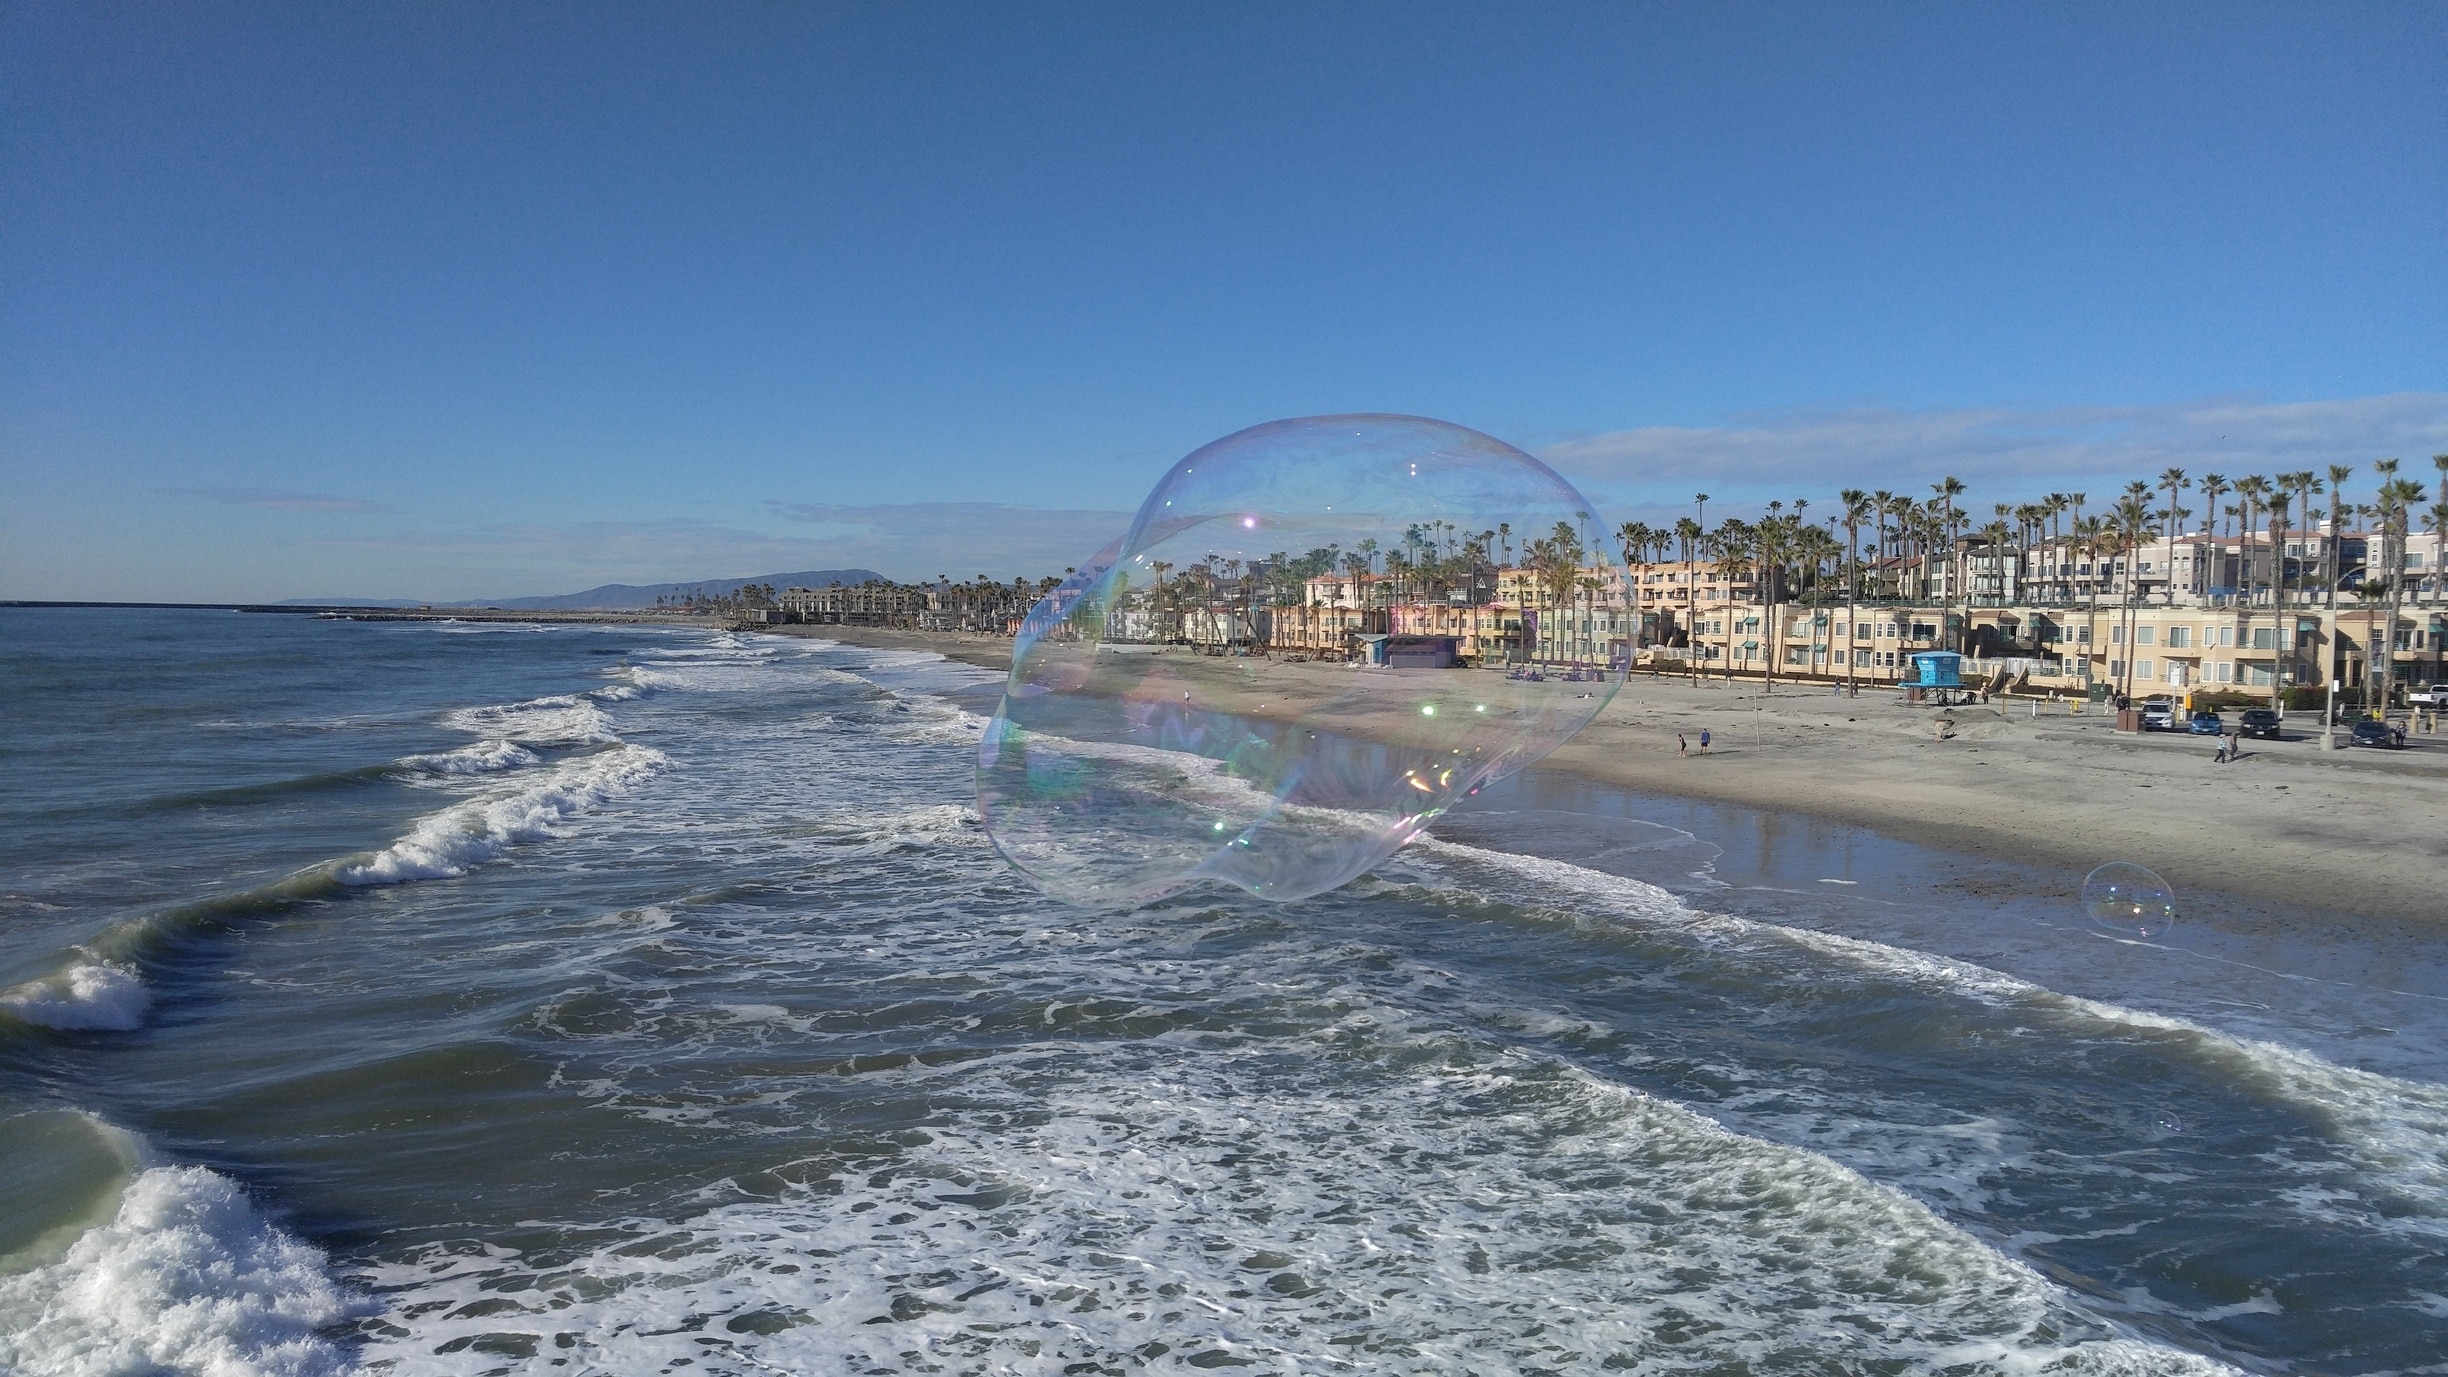 10 TOP Things to Do in Oceanside, CA (2021 Attraction & Activity Guide